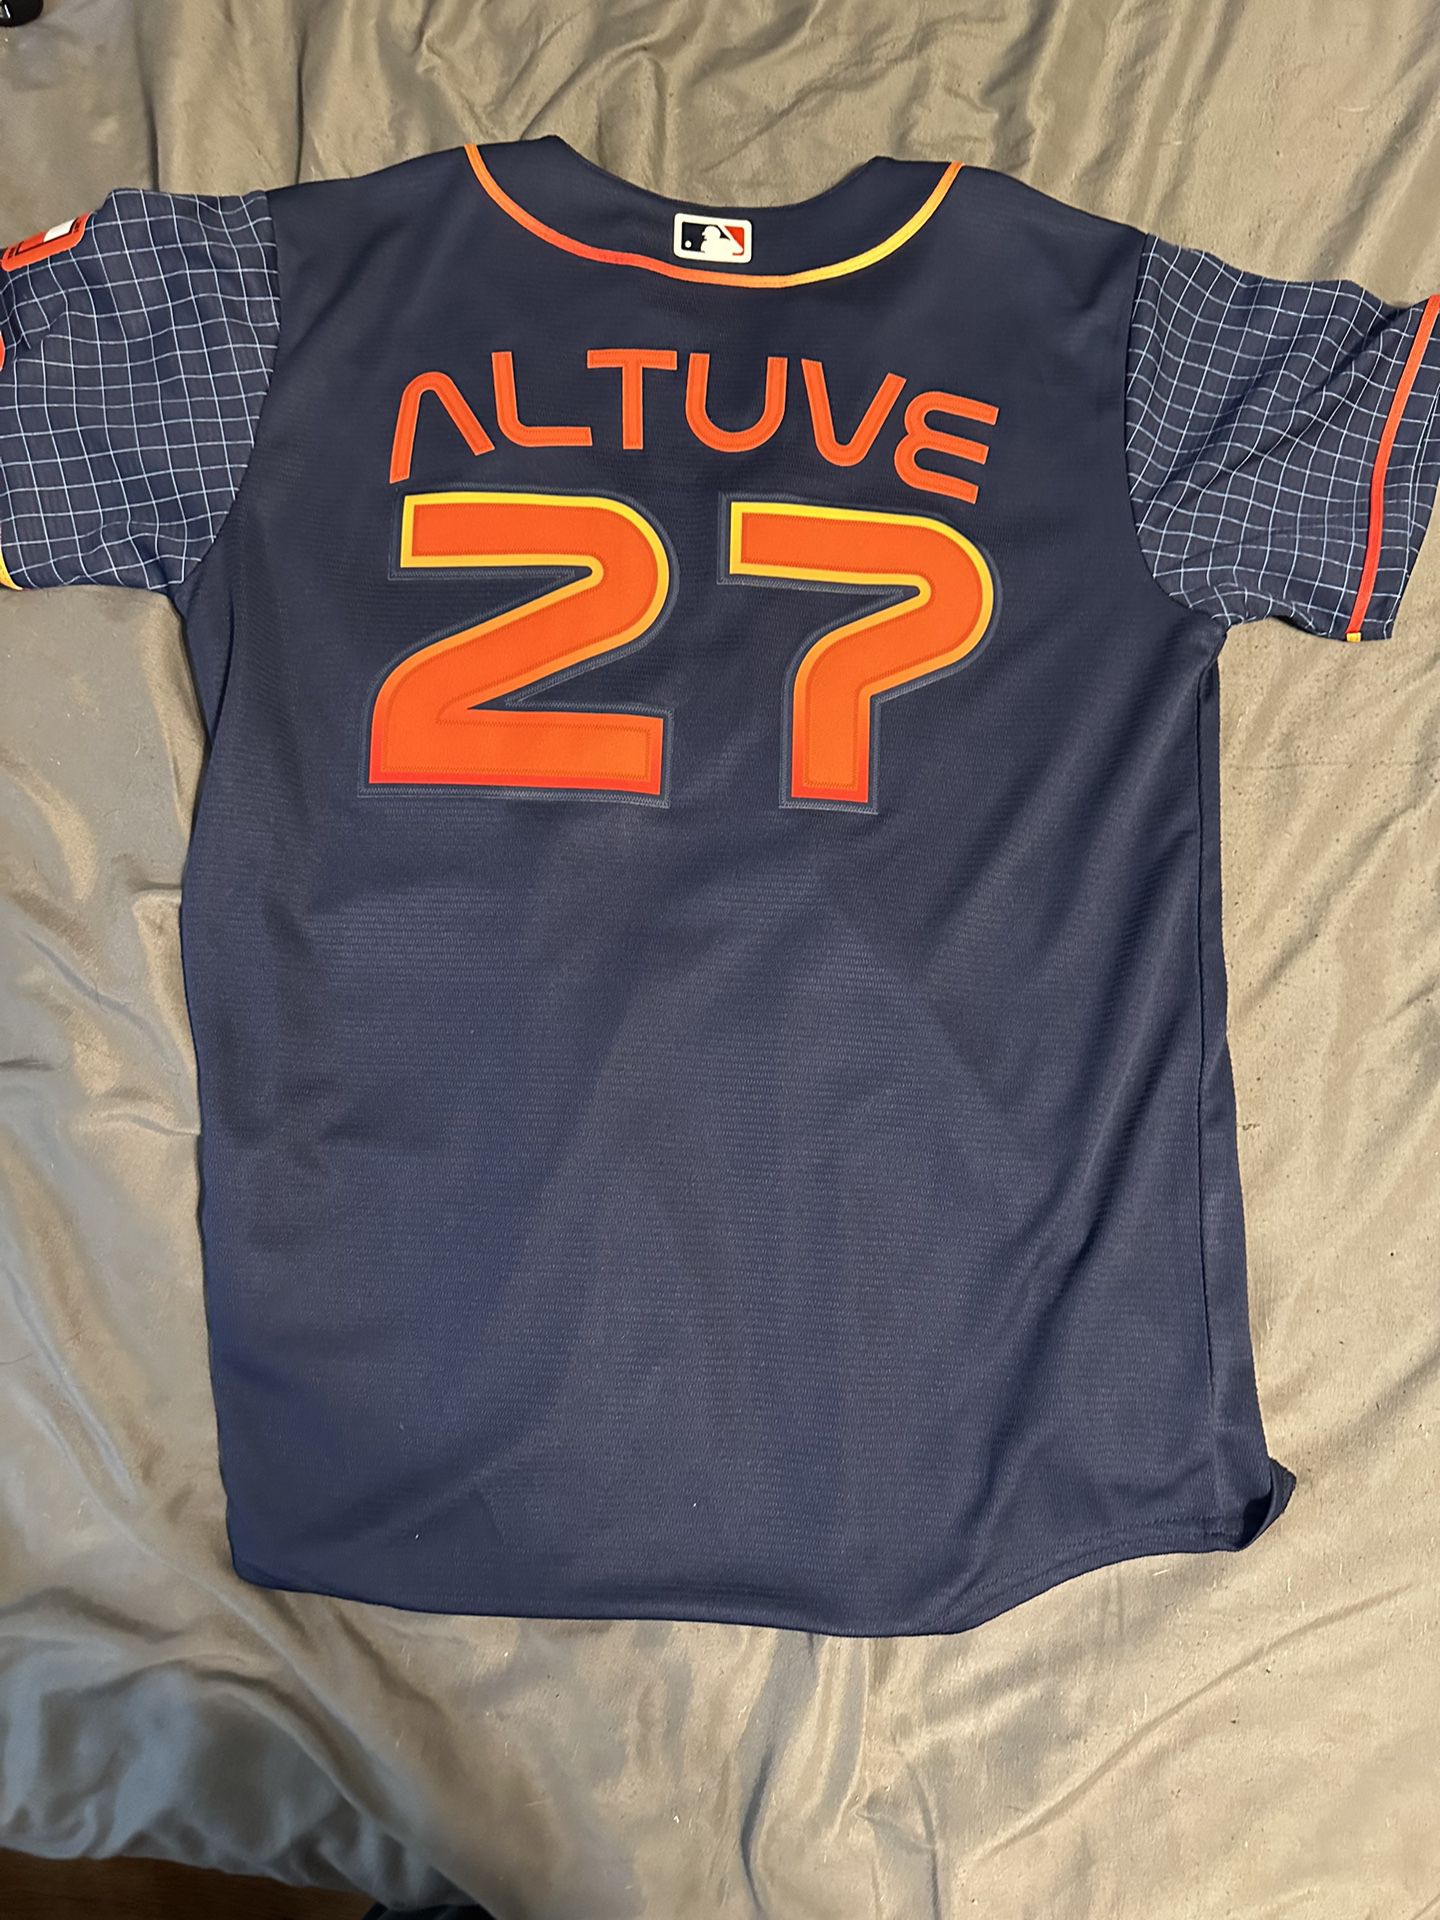 Houston Astros Jerseys (Black, White, Or Space City) for Sale in Webster,  TX - OfferUp